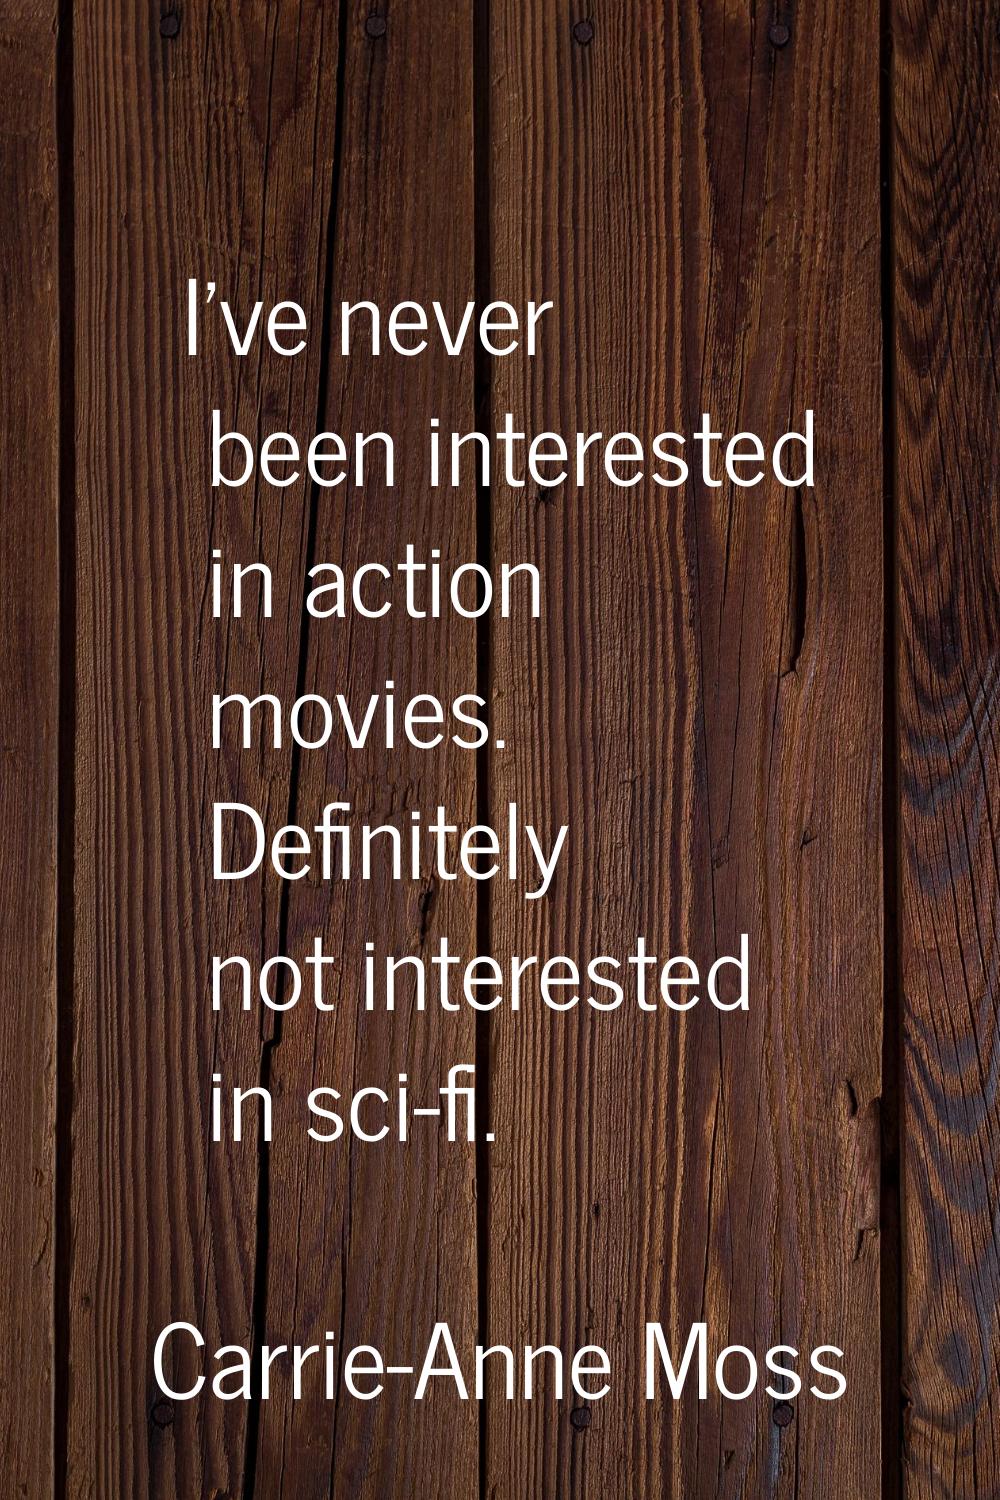 I've never been interested in action movies. Definitely not interested in sci-fi.